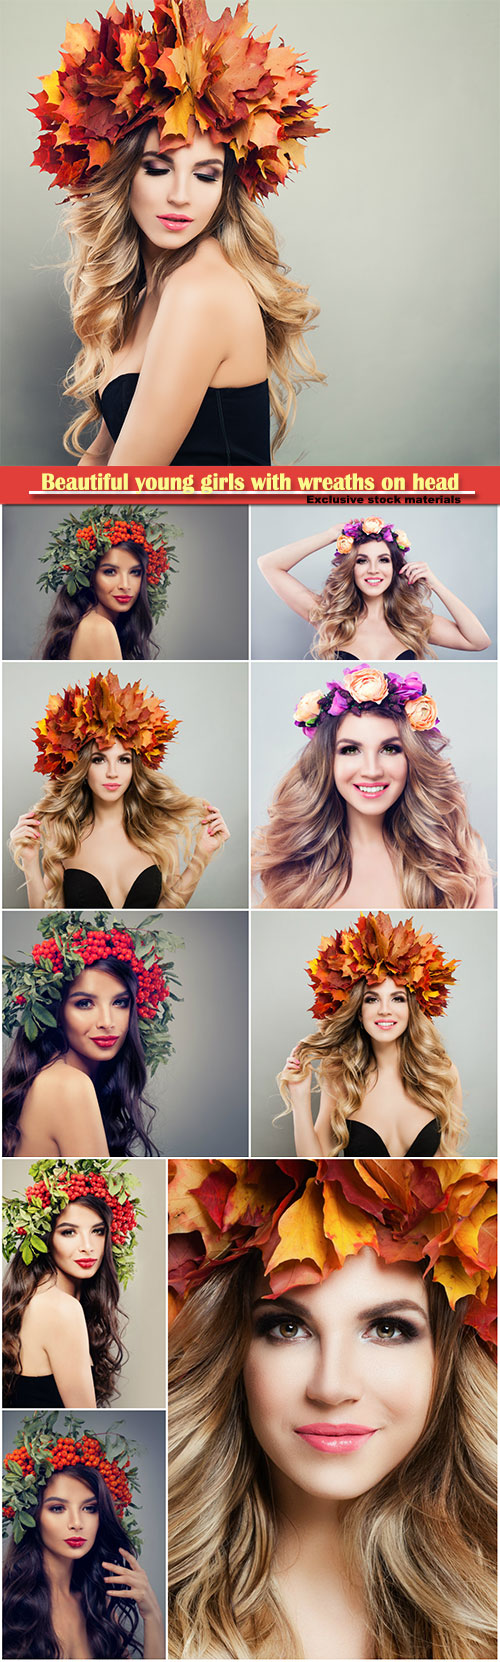 Beautiful young girls with wreaths on head